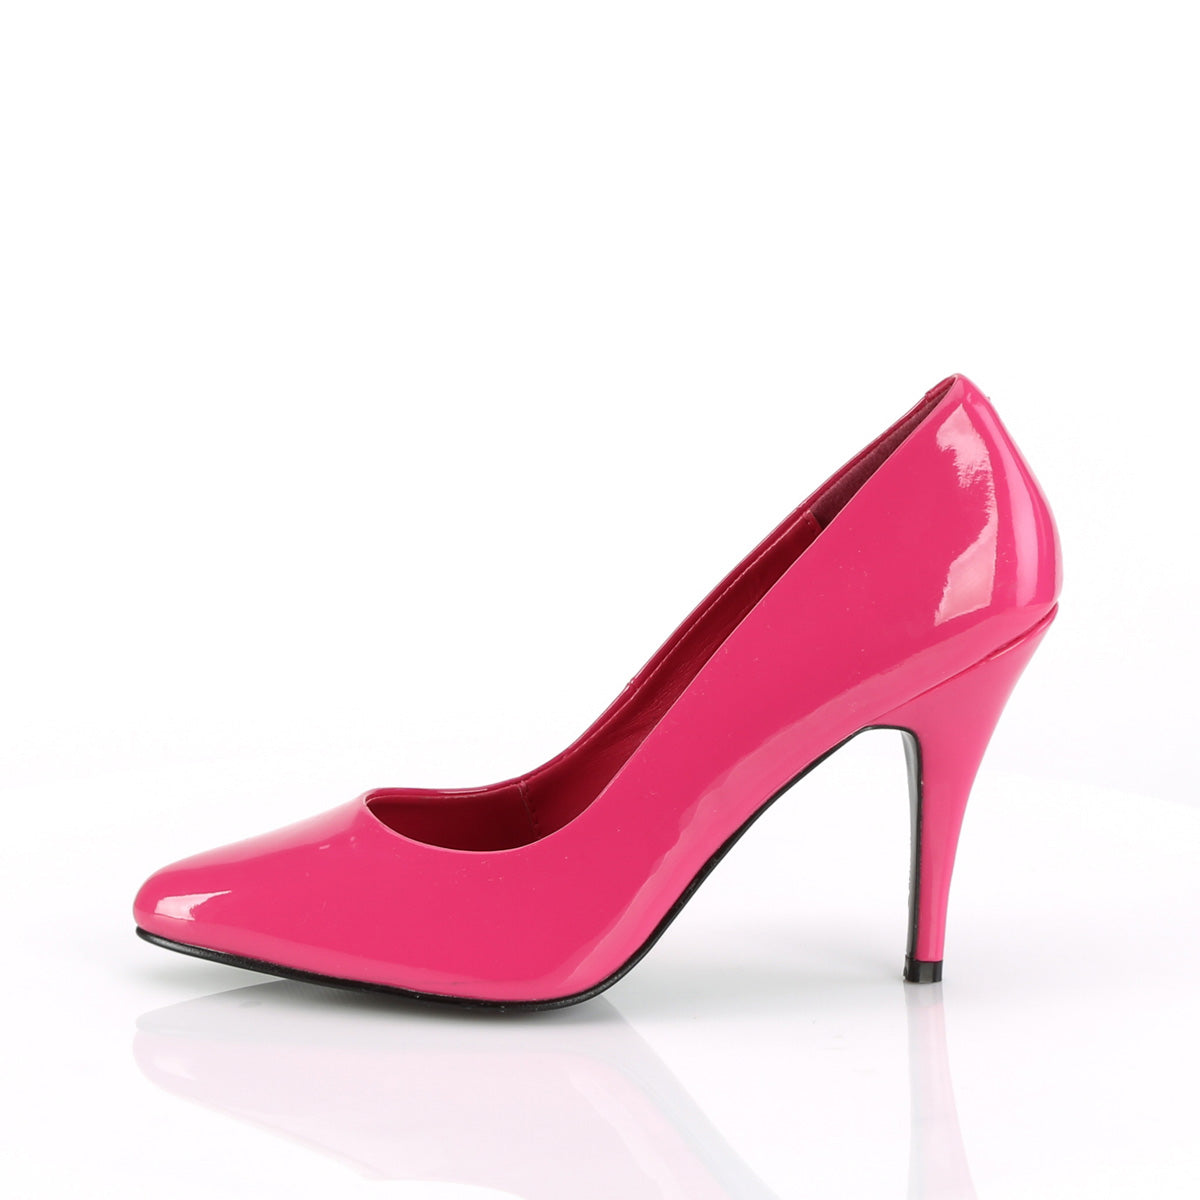 VANITY-420 Pleaser H Pink Patent Single Sole Shoes [Fetish Shoes]